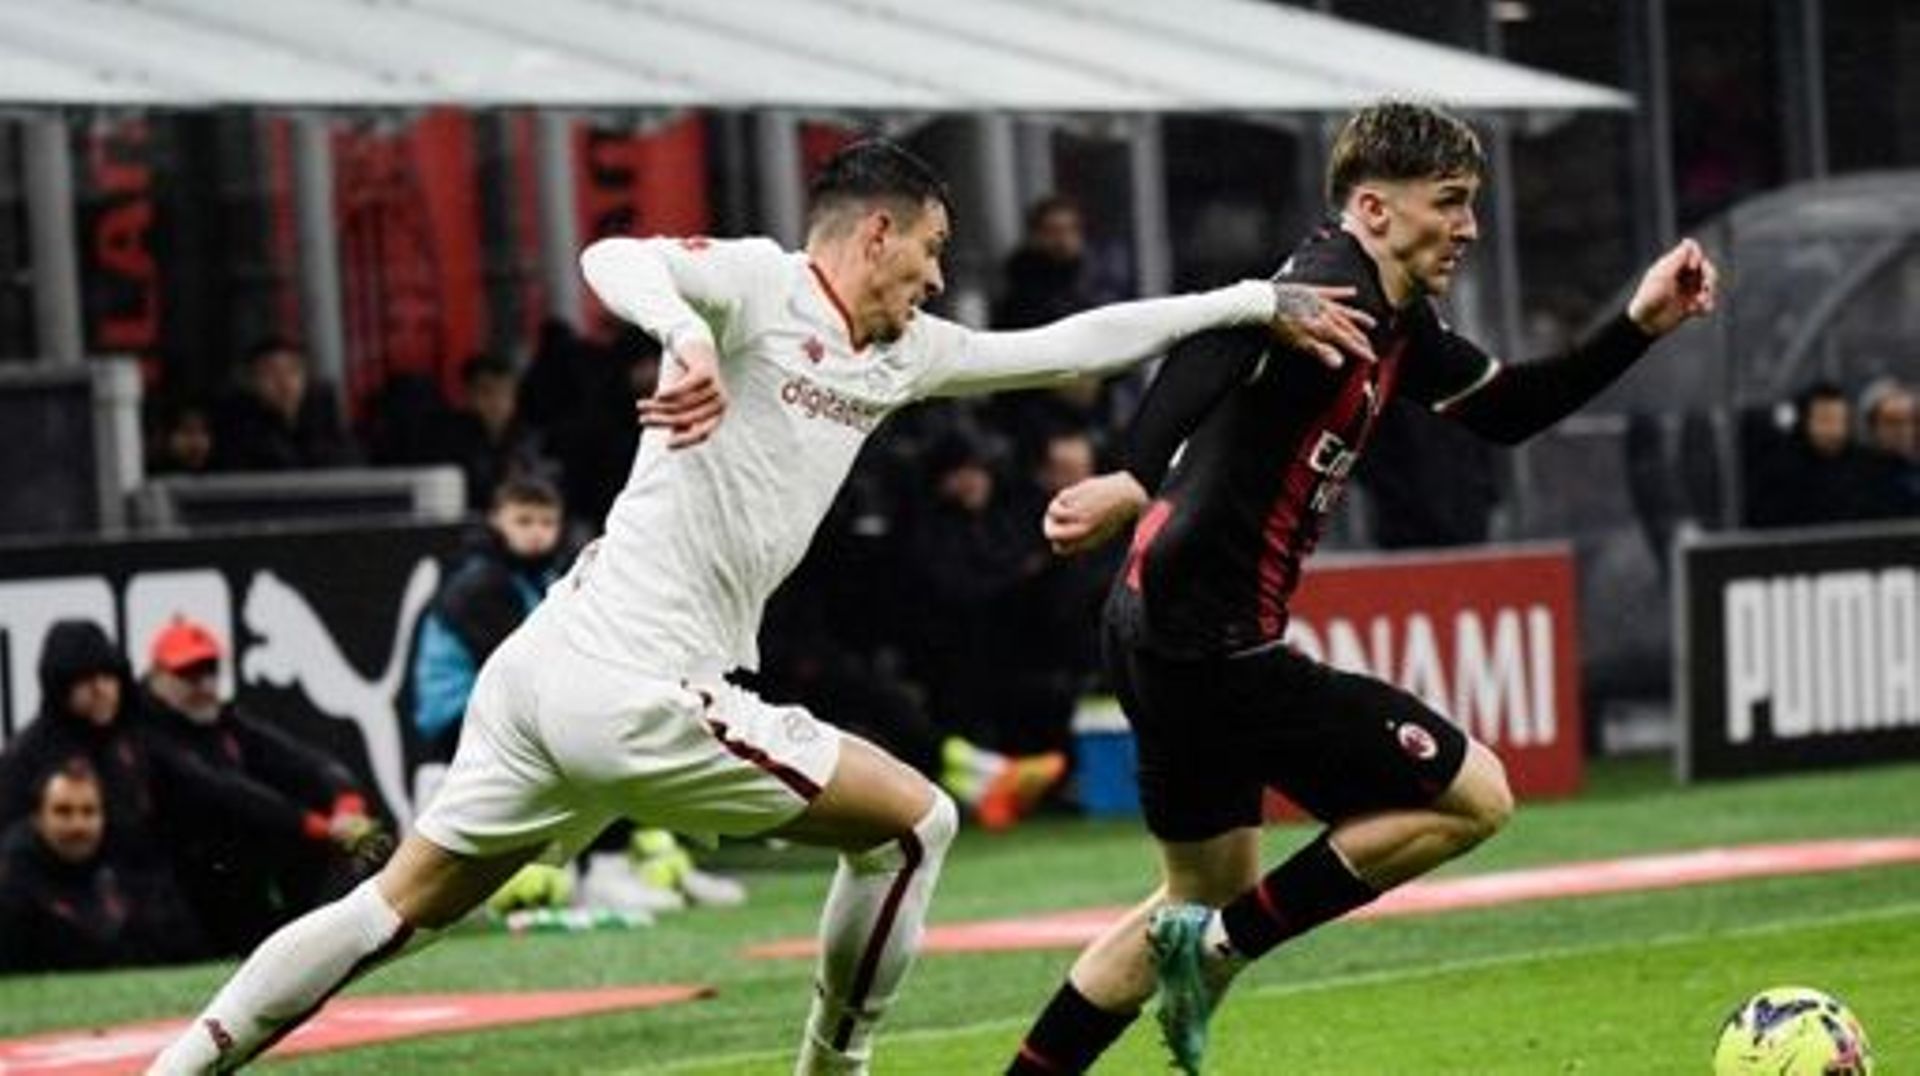 AS Roma's Brazilian defender Roger Ibanez (L) fights for the ball with AC Milan's Belgian forward Alexis Saelemaekers during the Italian Serie A football match between AC Milan and AS Roma, at the San Siro stadium in Milan, on January 8, 2023.  Filippo MO